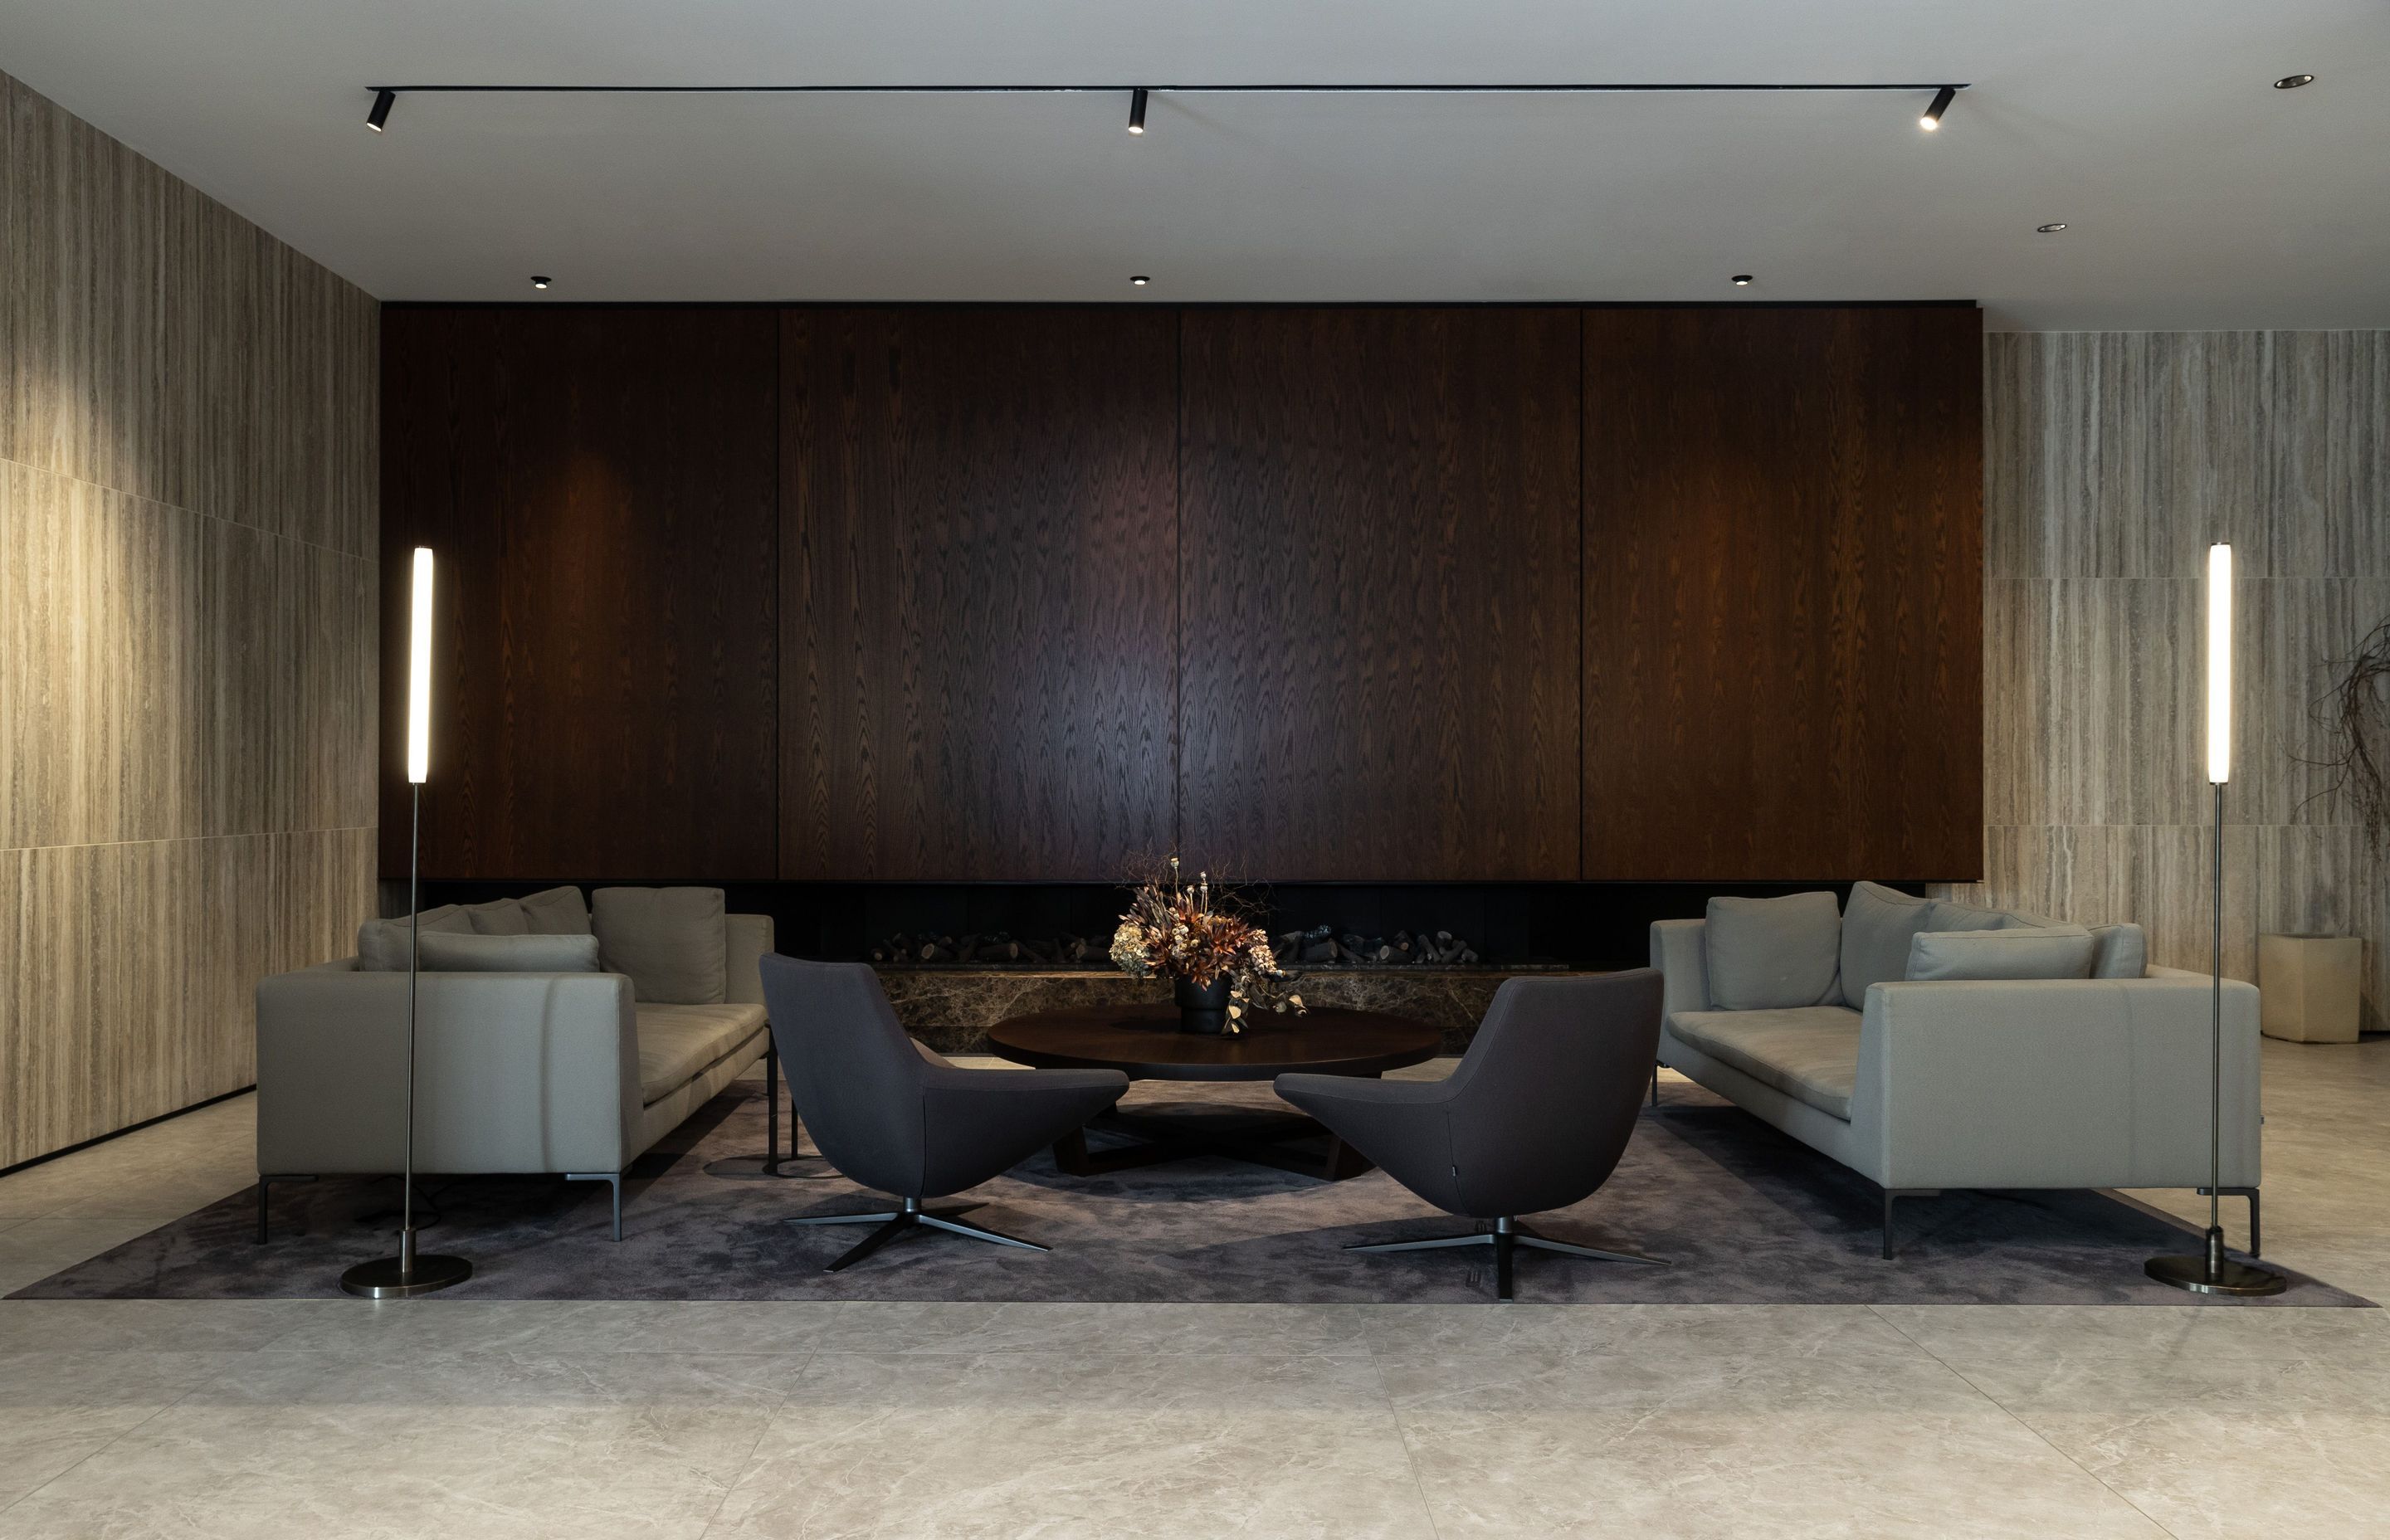 The formal 'lounge area' features the Charles sofa by Antonio Citterio, the Xilo low table in smoked oak and a pair of Jeffrey Bernett Metropolitan swivel chairs—all from B&amp;B Italia.